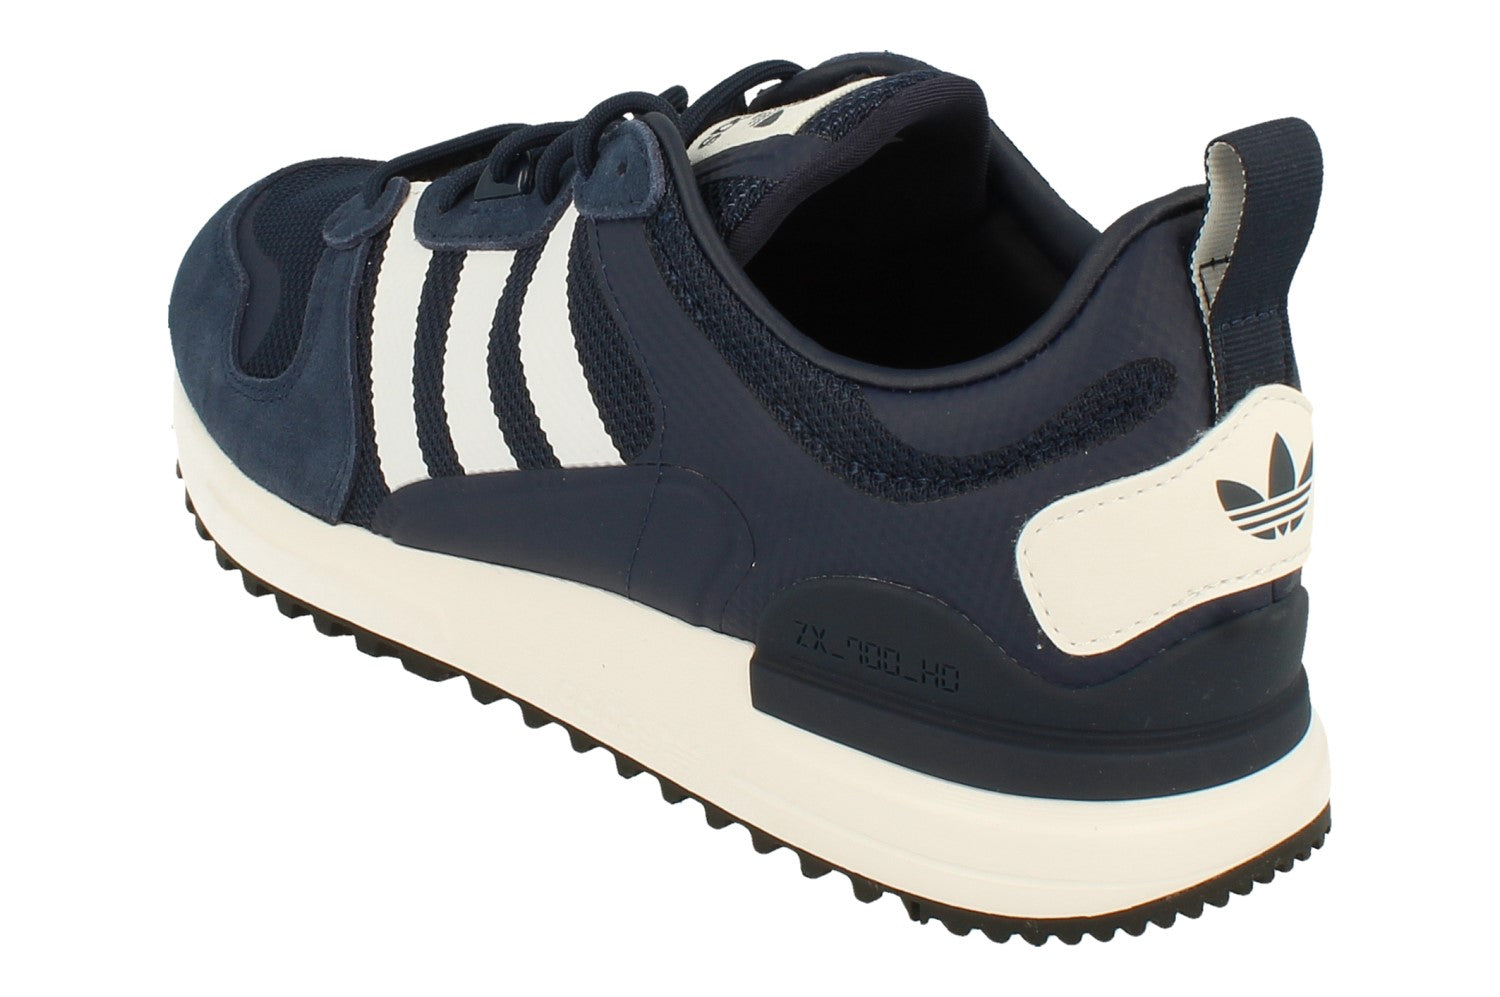 Buy Adidas Originals ZX 700 HD Mens Trainers Sneakers (uk 7 us 7.5 eu 40 2/3, navy white black FY1102 - Free UK Delivery - Super Fast EURO & USA – KicksWorldwide